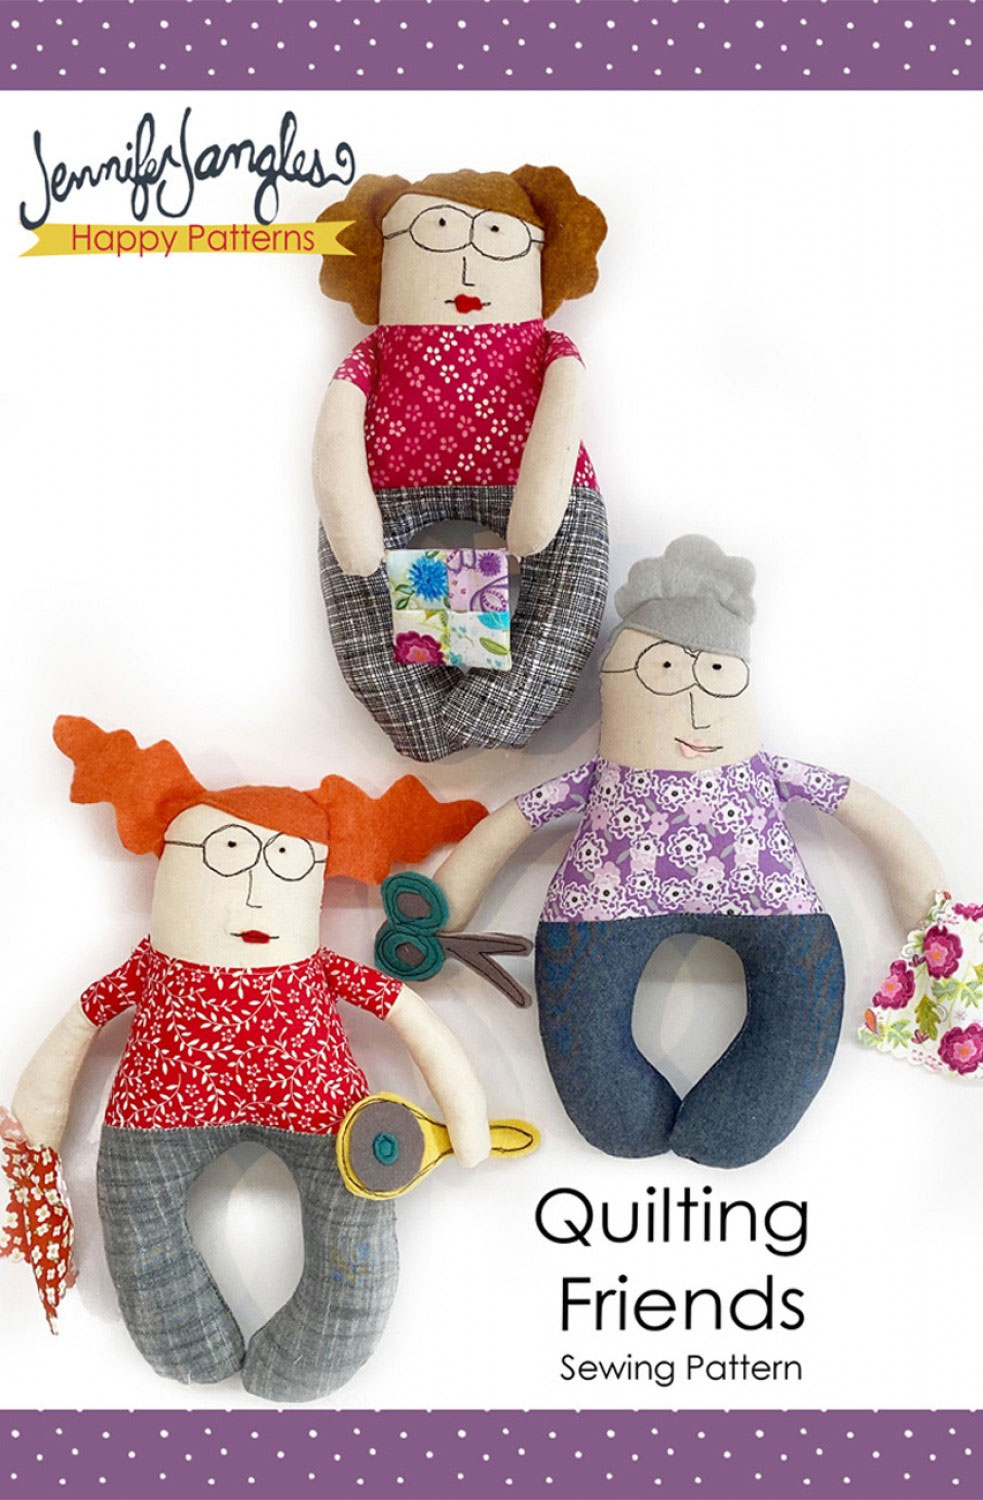 Quilting-Friends-soft-toy-sewing-pattern-Jennifer-Jangles-front